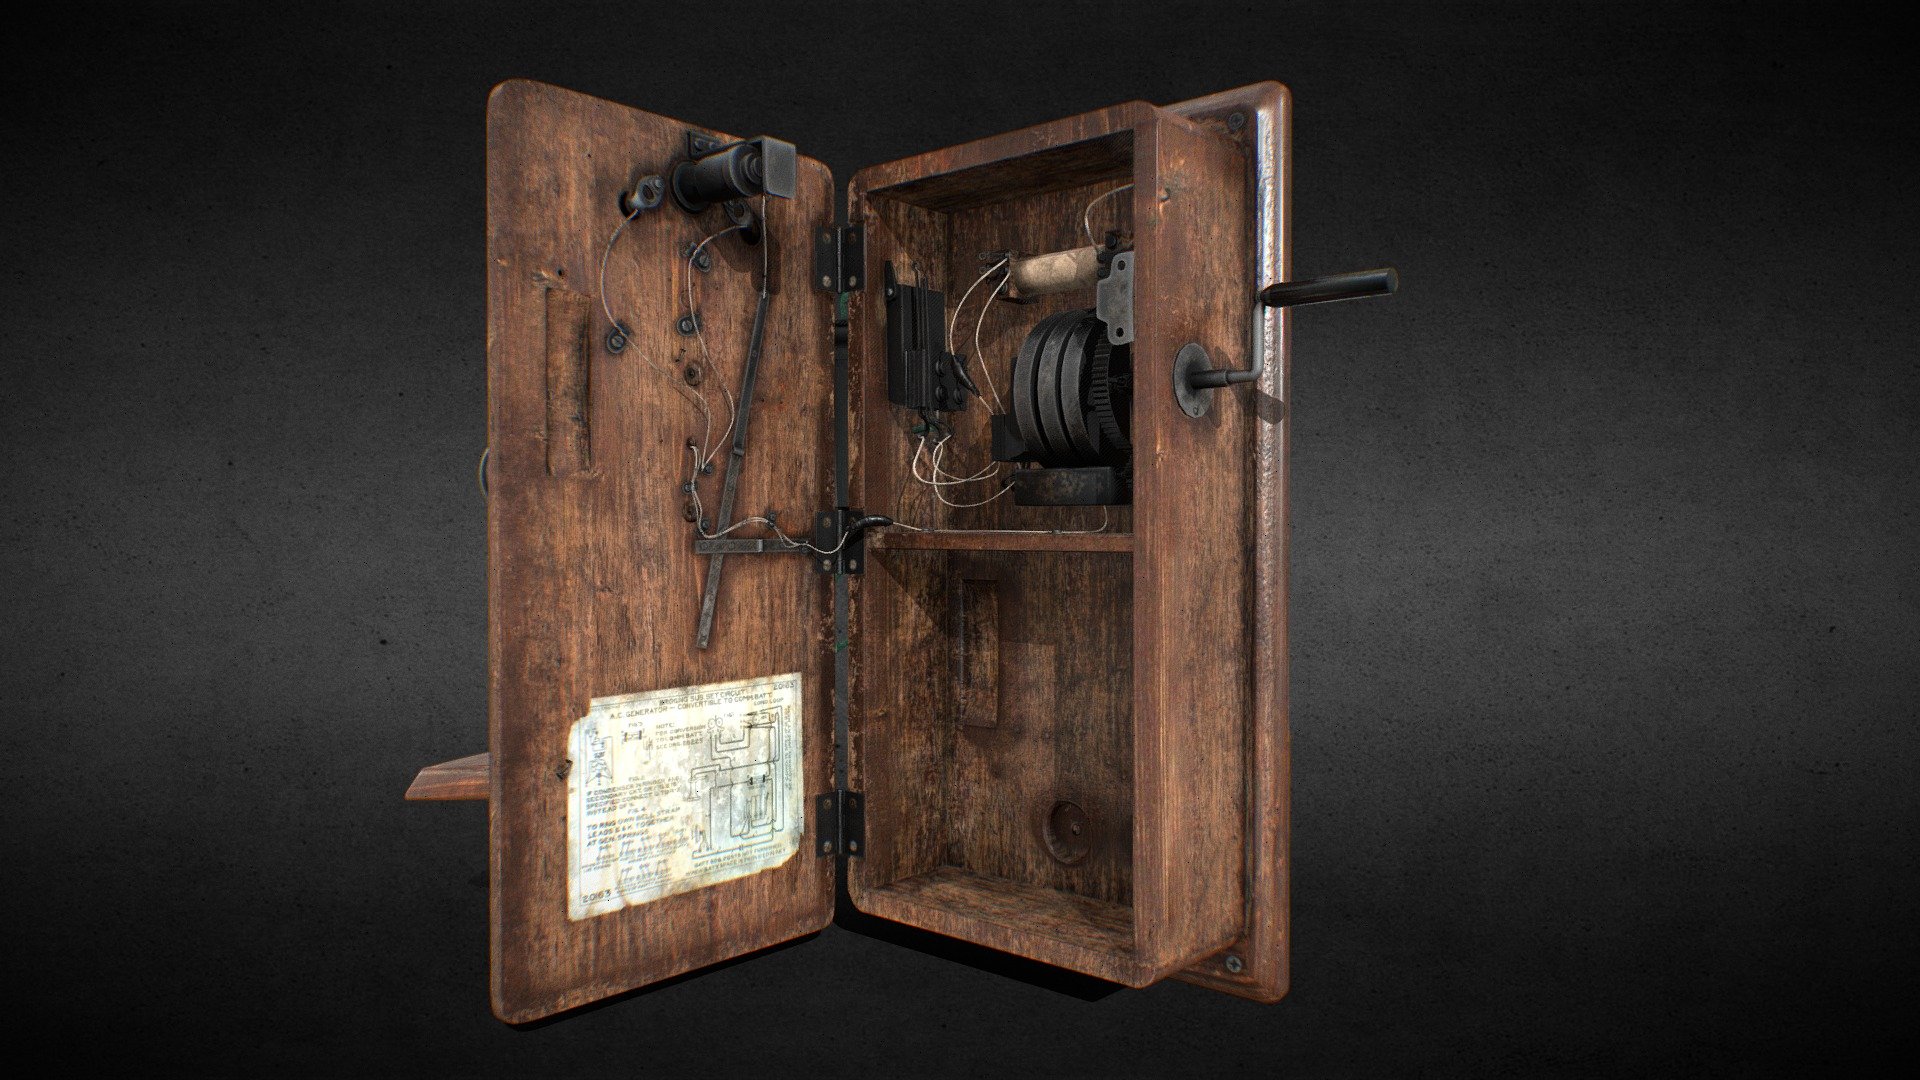 A personal job to train UVs and Textures - Phone Vintage - 3D model by Jeferson Porto Bergmam ( OPEN FOR JOBS) (@Jeferson.Bergmam.Modelador) 3d model